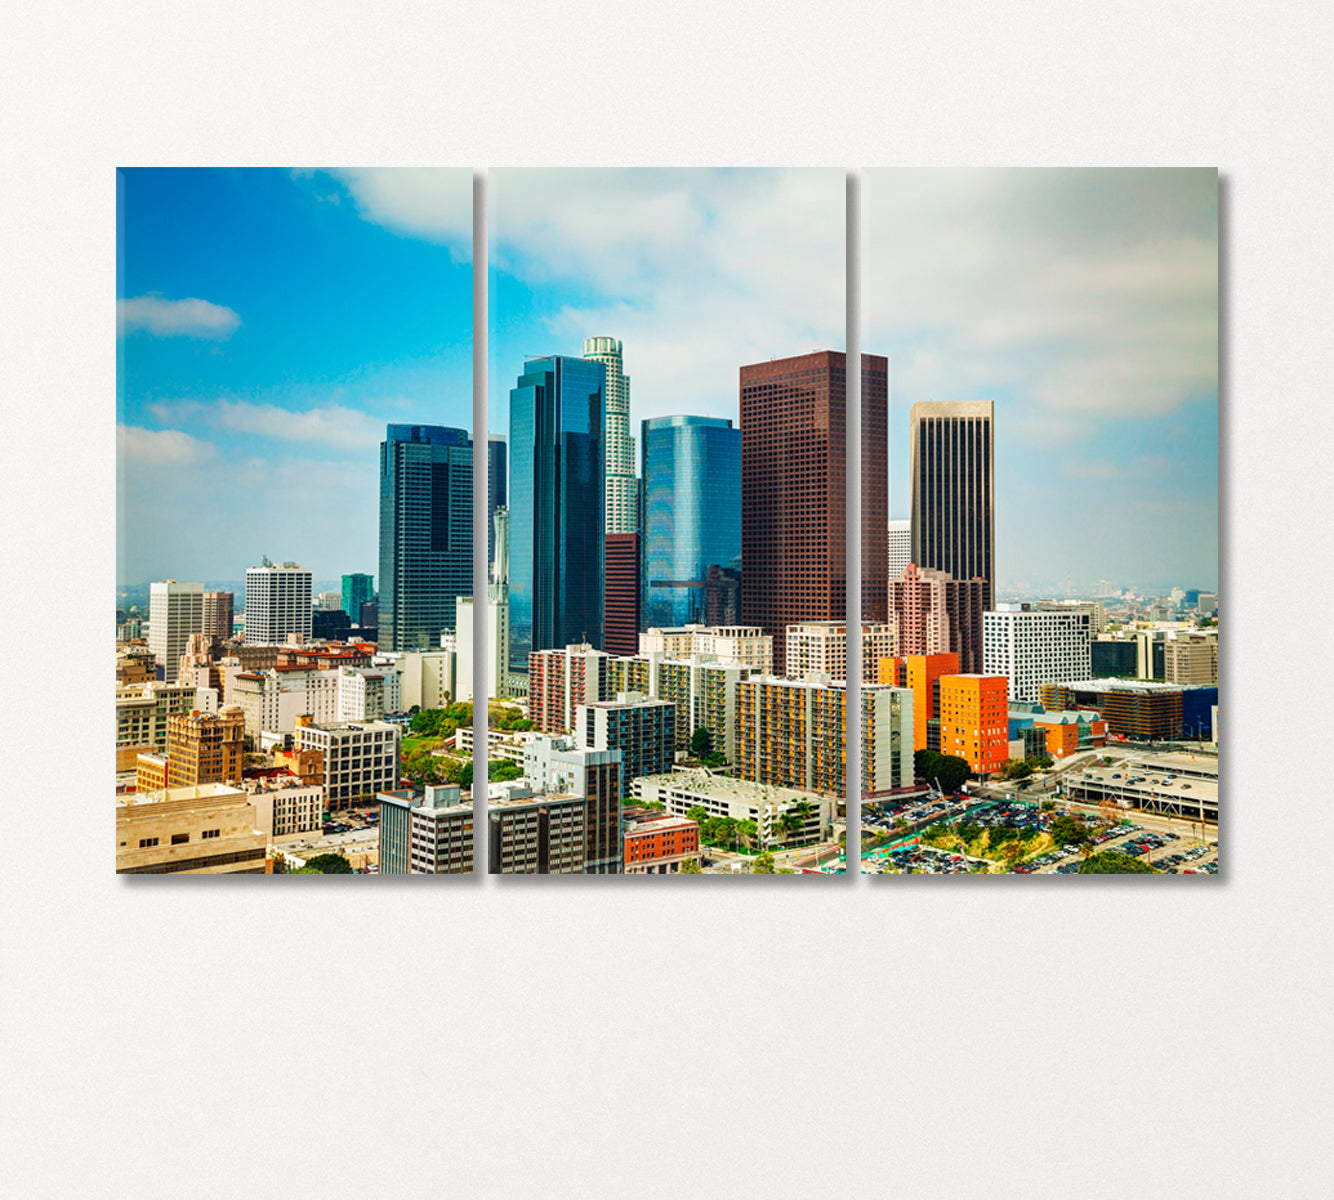 Los Angeles Cityscape on Sunny Day Canvas Print-Canvas Print-CetArt-3 Panels-36x24 inches-CetArt